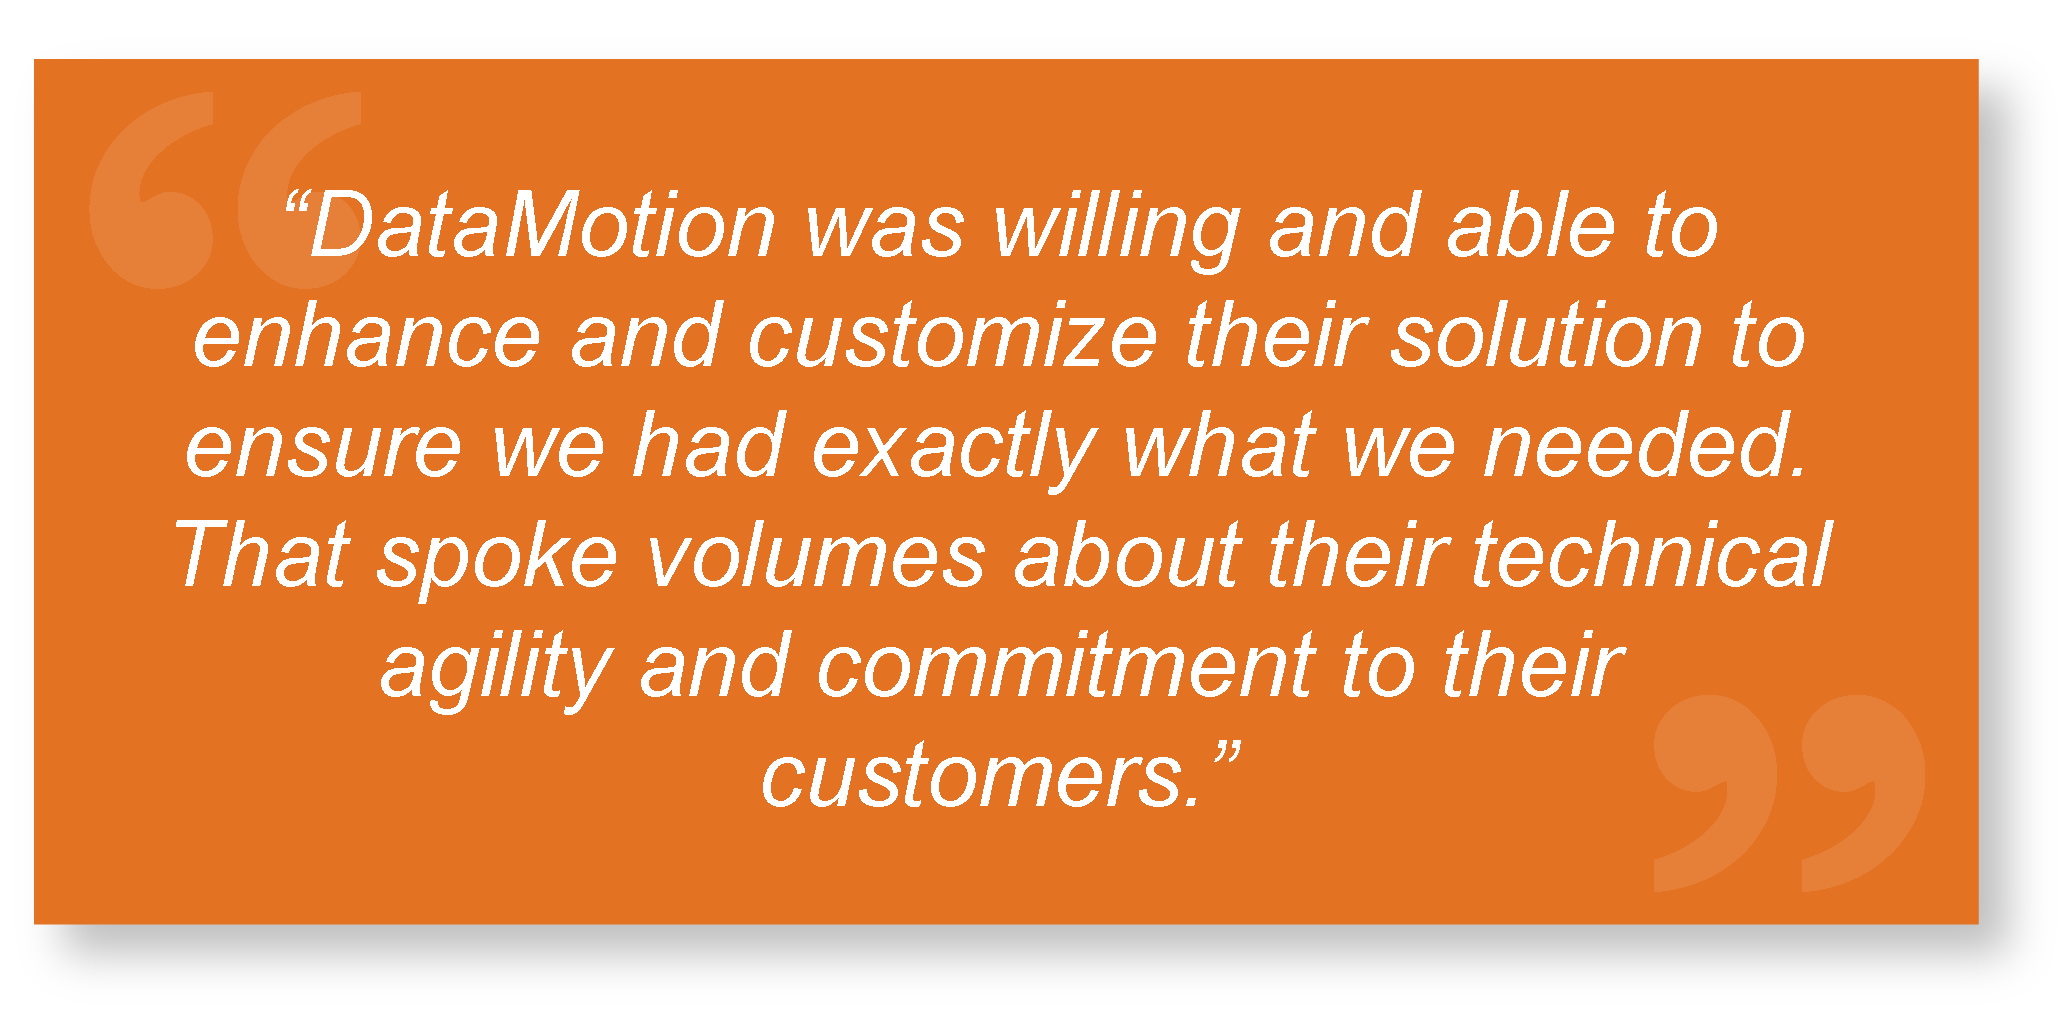 DataMotion was willing and able to enhance and customize their solution to ensure we had exactly what we needed...